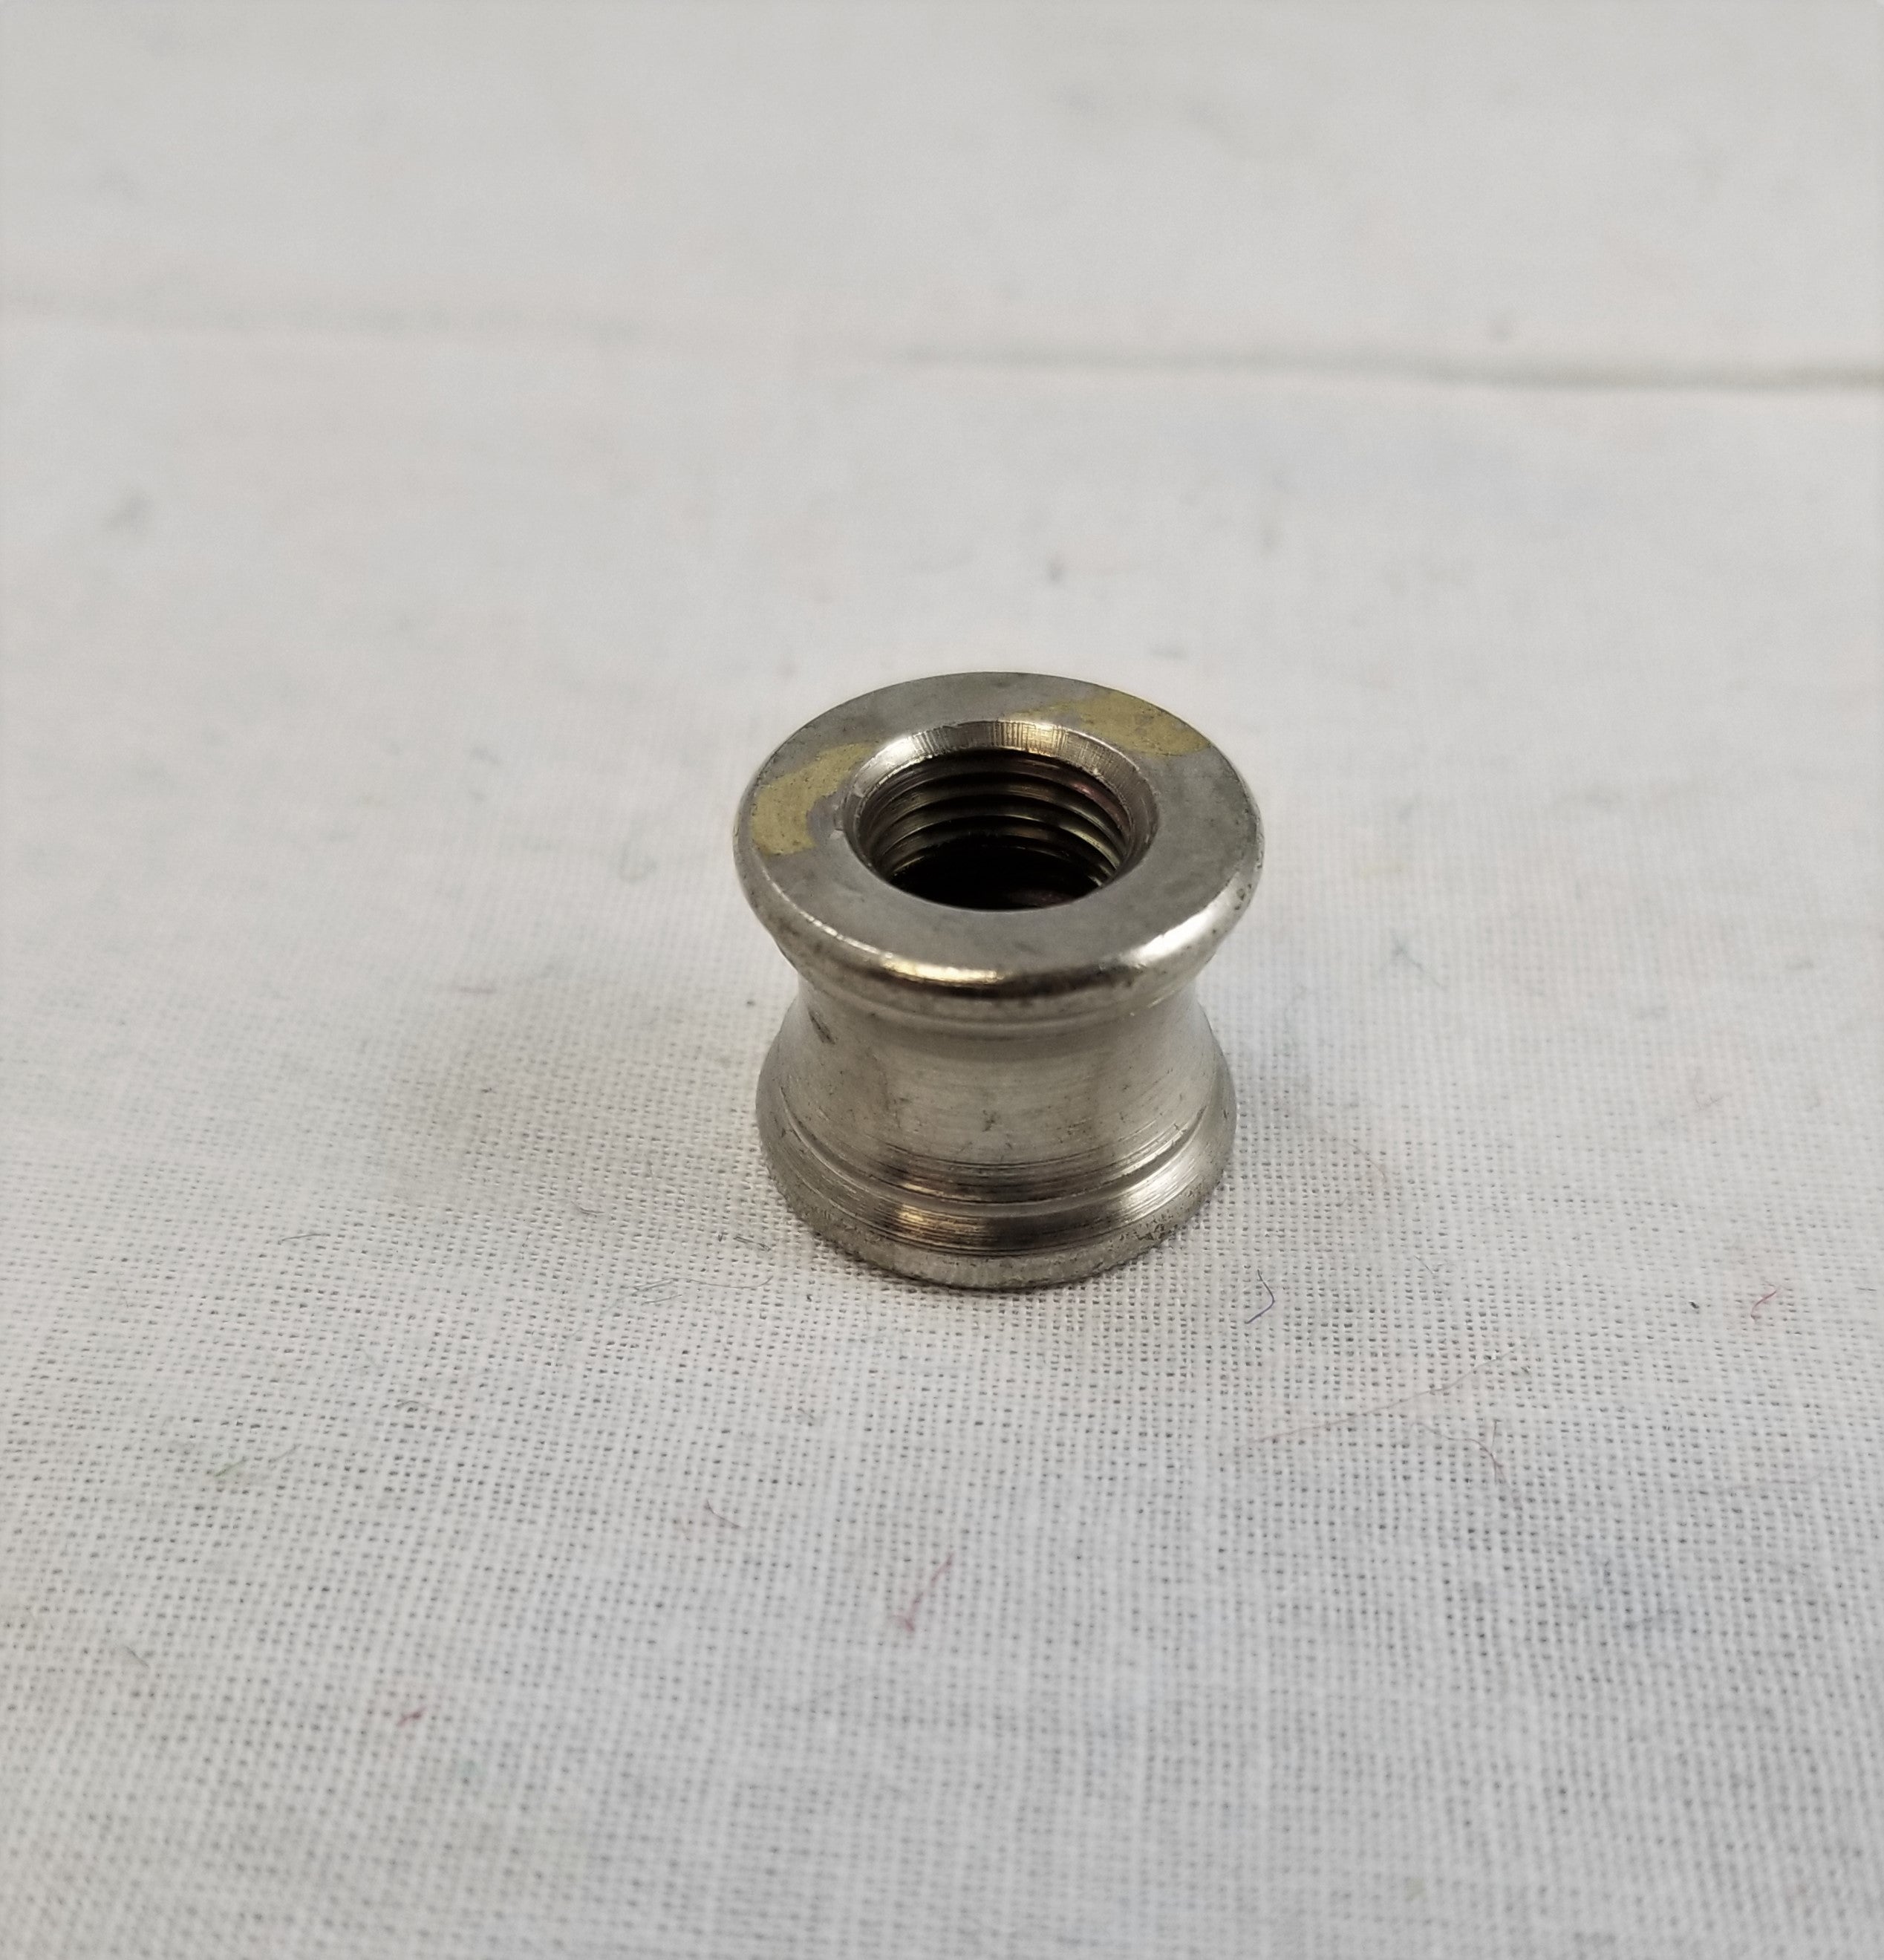 Brass Coupling Nickle Plated - Tapped 1/8 IP F x 1/4 IP F